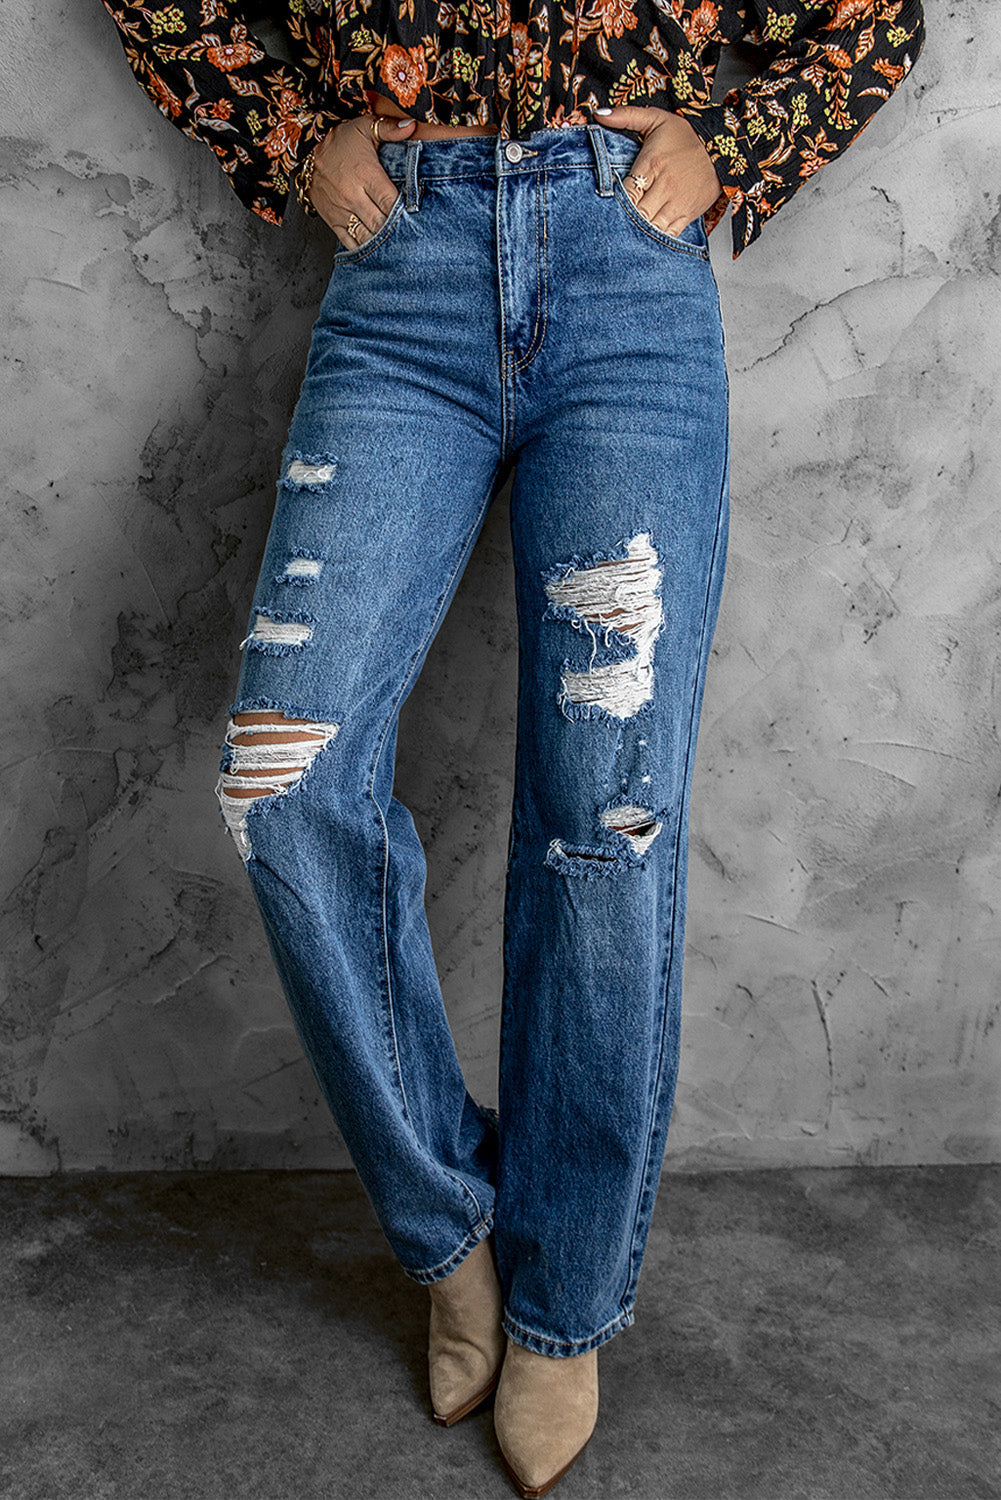 Distressed High Waist Jeans with Pockets - Blue / XL - Bottoms - Pants - 2 - 2024